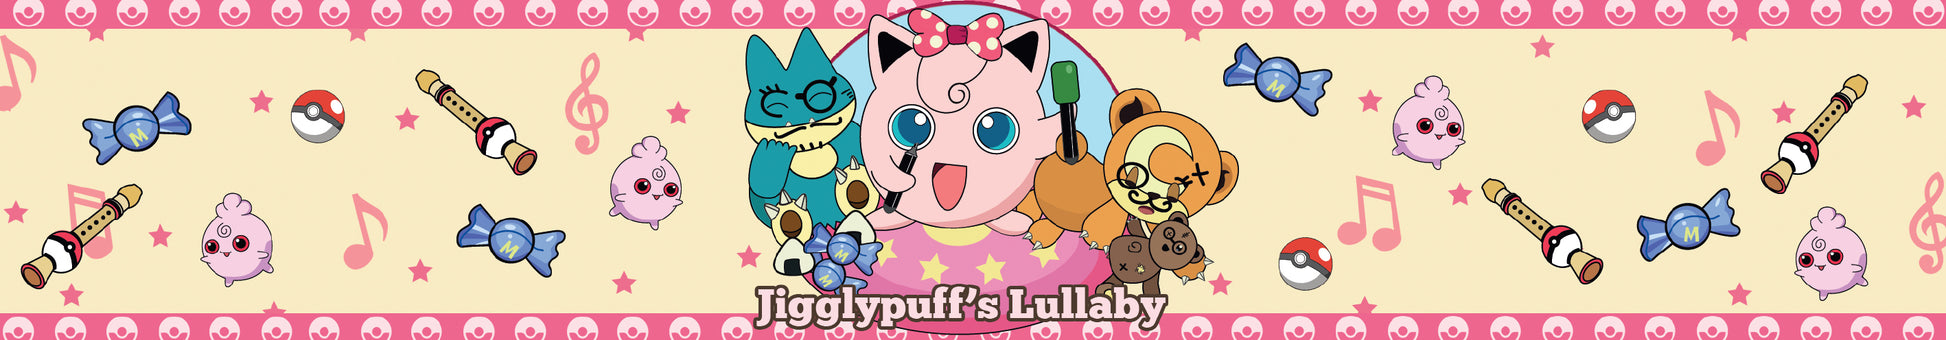 Jiggly puff lullaby pokemon inspired scented candle label design | Happy Piranha